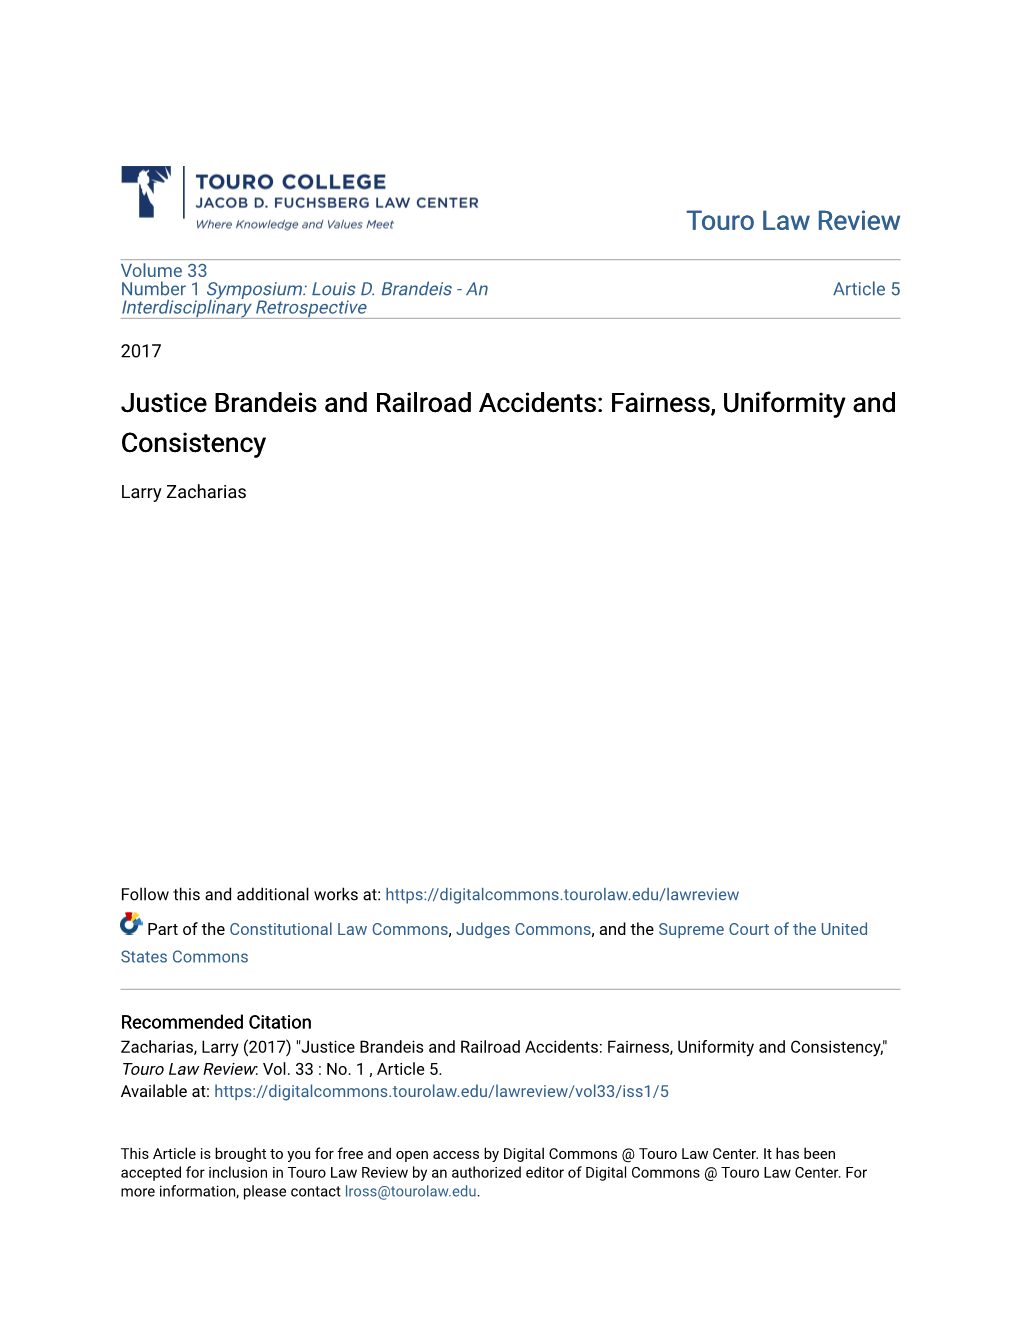 Justice Brandeis and Railroad Accidents: Fairness, Uniformity and Consistency